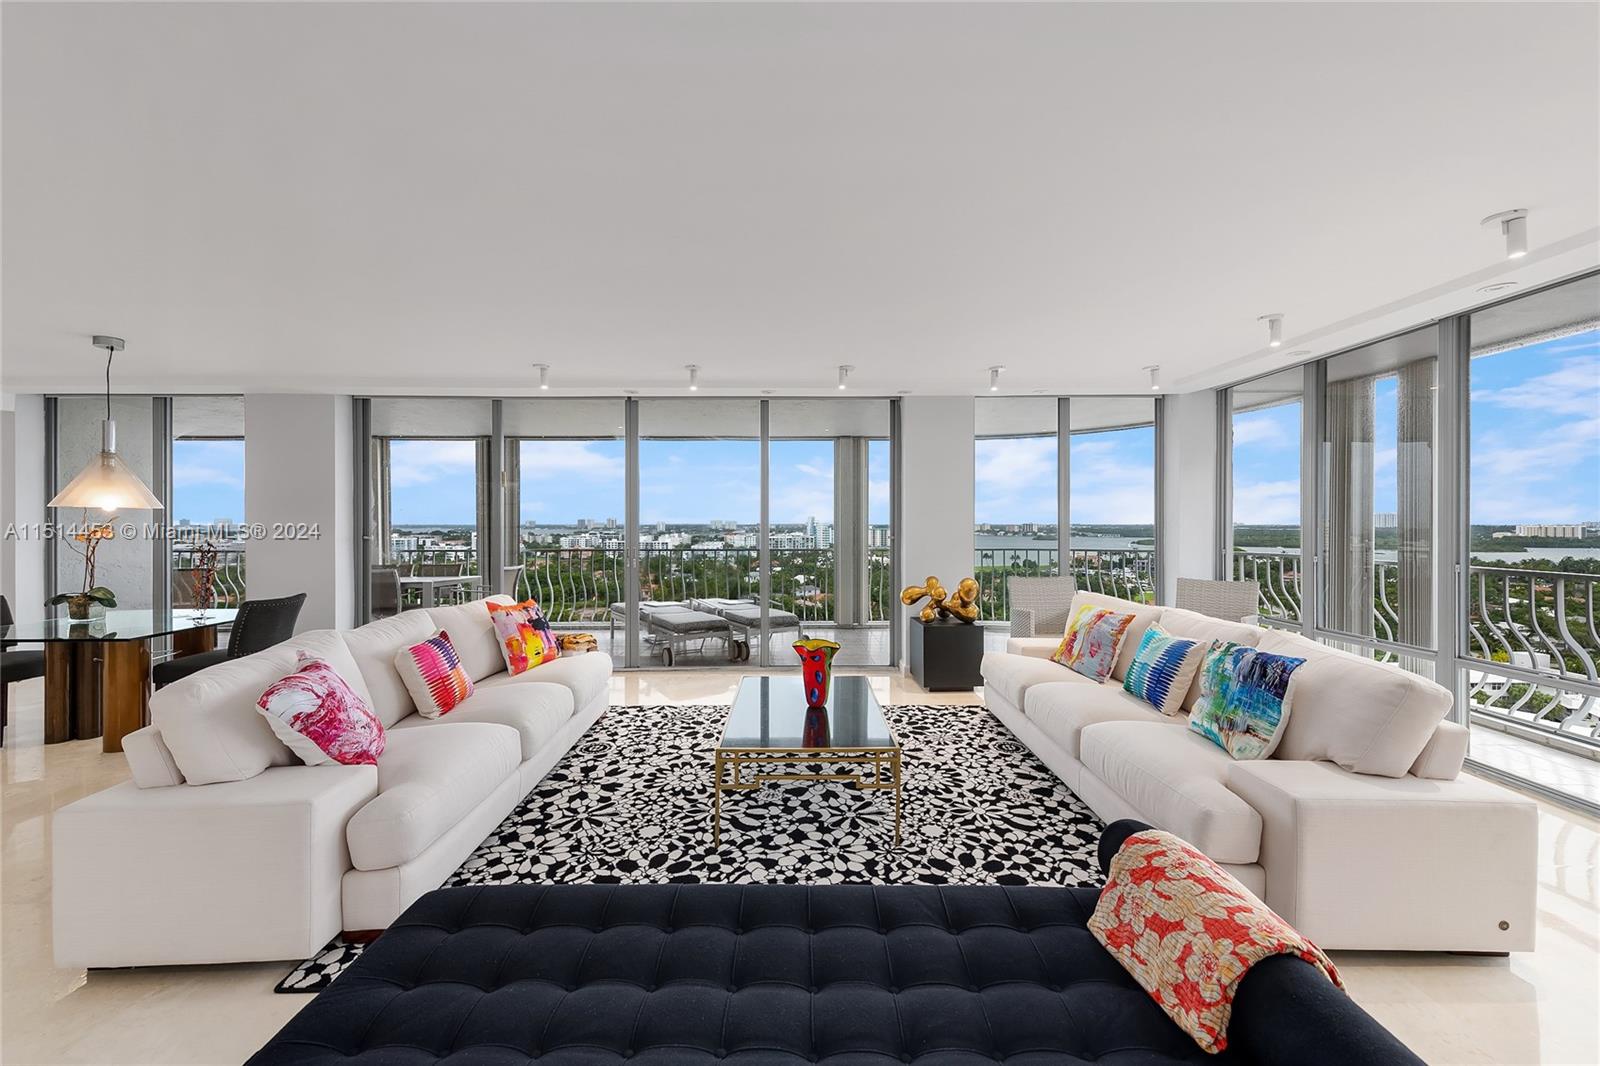 Located in the prestigious Bal Harbour 101, this corner 4 bed residence offers over 3,000 sf of comfortable luxury living. With its breathtaking views, the sun's rays flow in through the floor-to-ceiling windows, illuminating the spacious living and dining areas. The primary suite offers serenity complete w/ a private balcony facing the ocean and two separate walk-in closets and bathrooms. The other three bedrooms provide ample space for family / friends. The amenities allow Residents to indulge in a workout, followed by a refreshing dip in the pool and ending the day w/ a stroll along the beach. Bal Harbour 101 is a sanctuary that offers the best of both worlds – a peaceful retreat from the bustling city, yet close enough to enjoy the shops and restaurants that Bal Harbour has to offer.